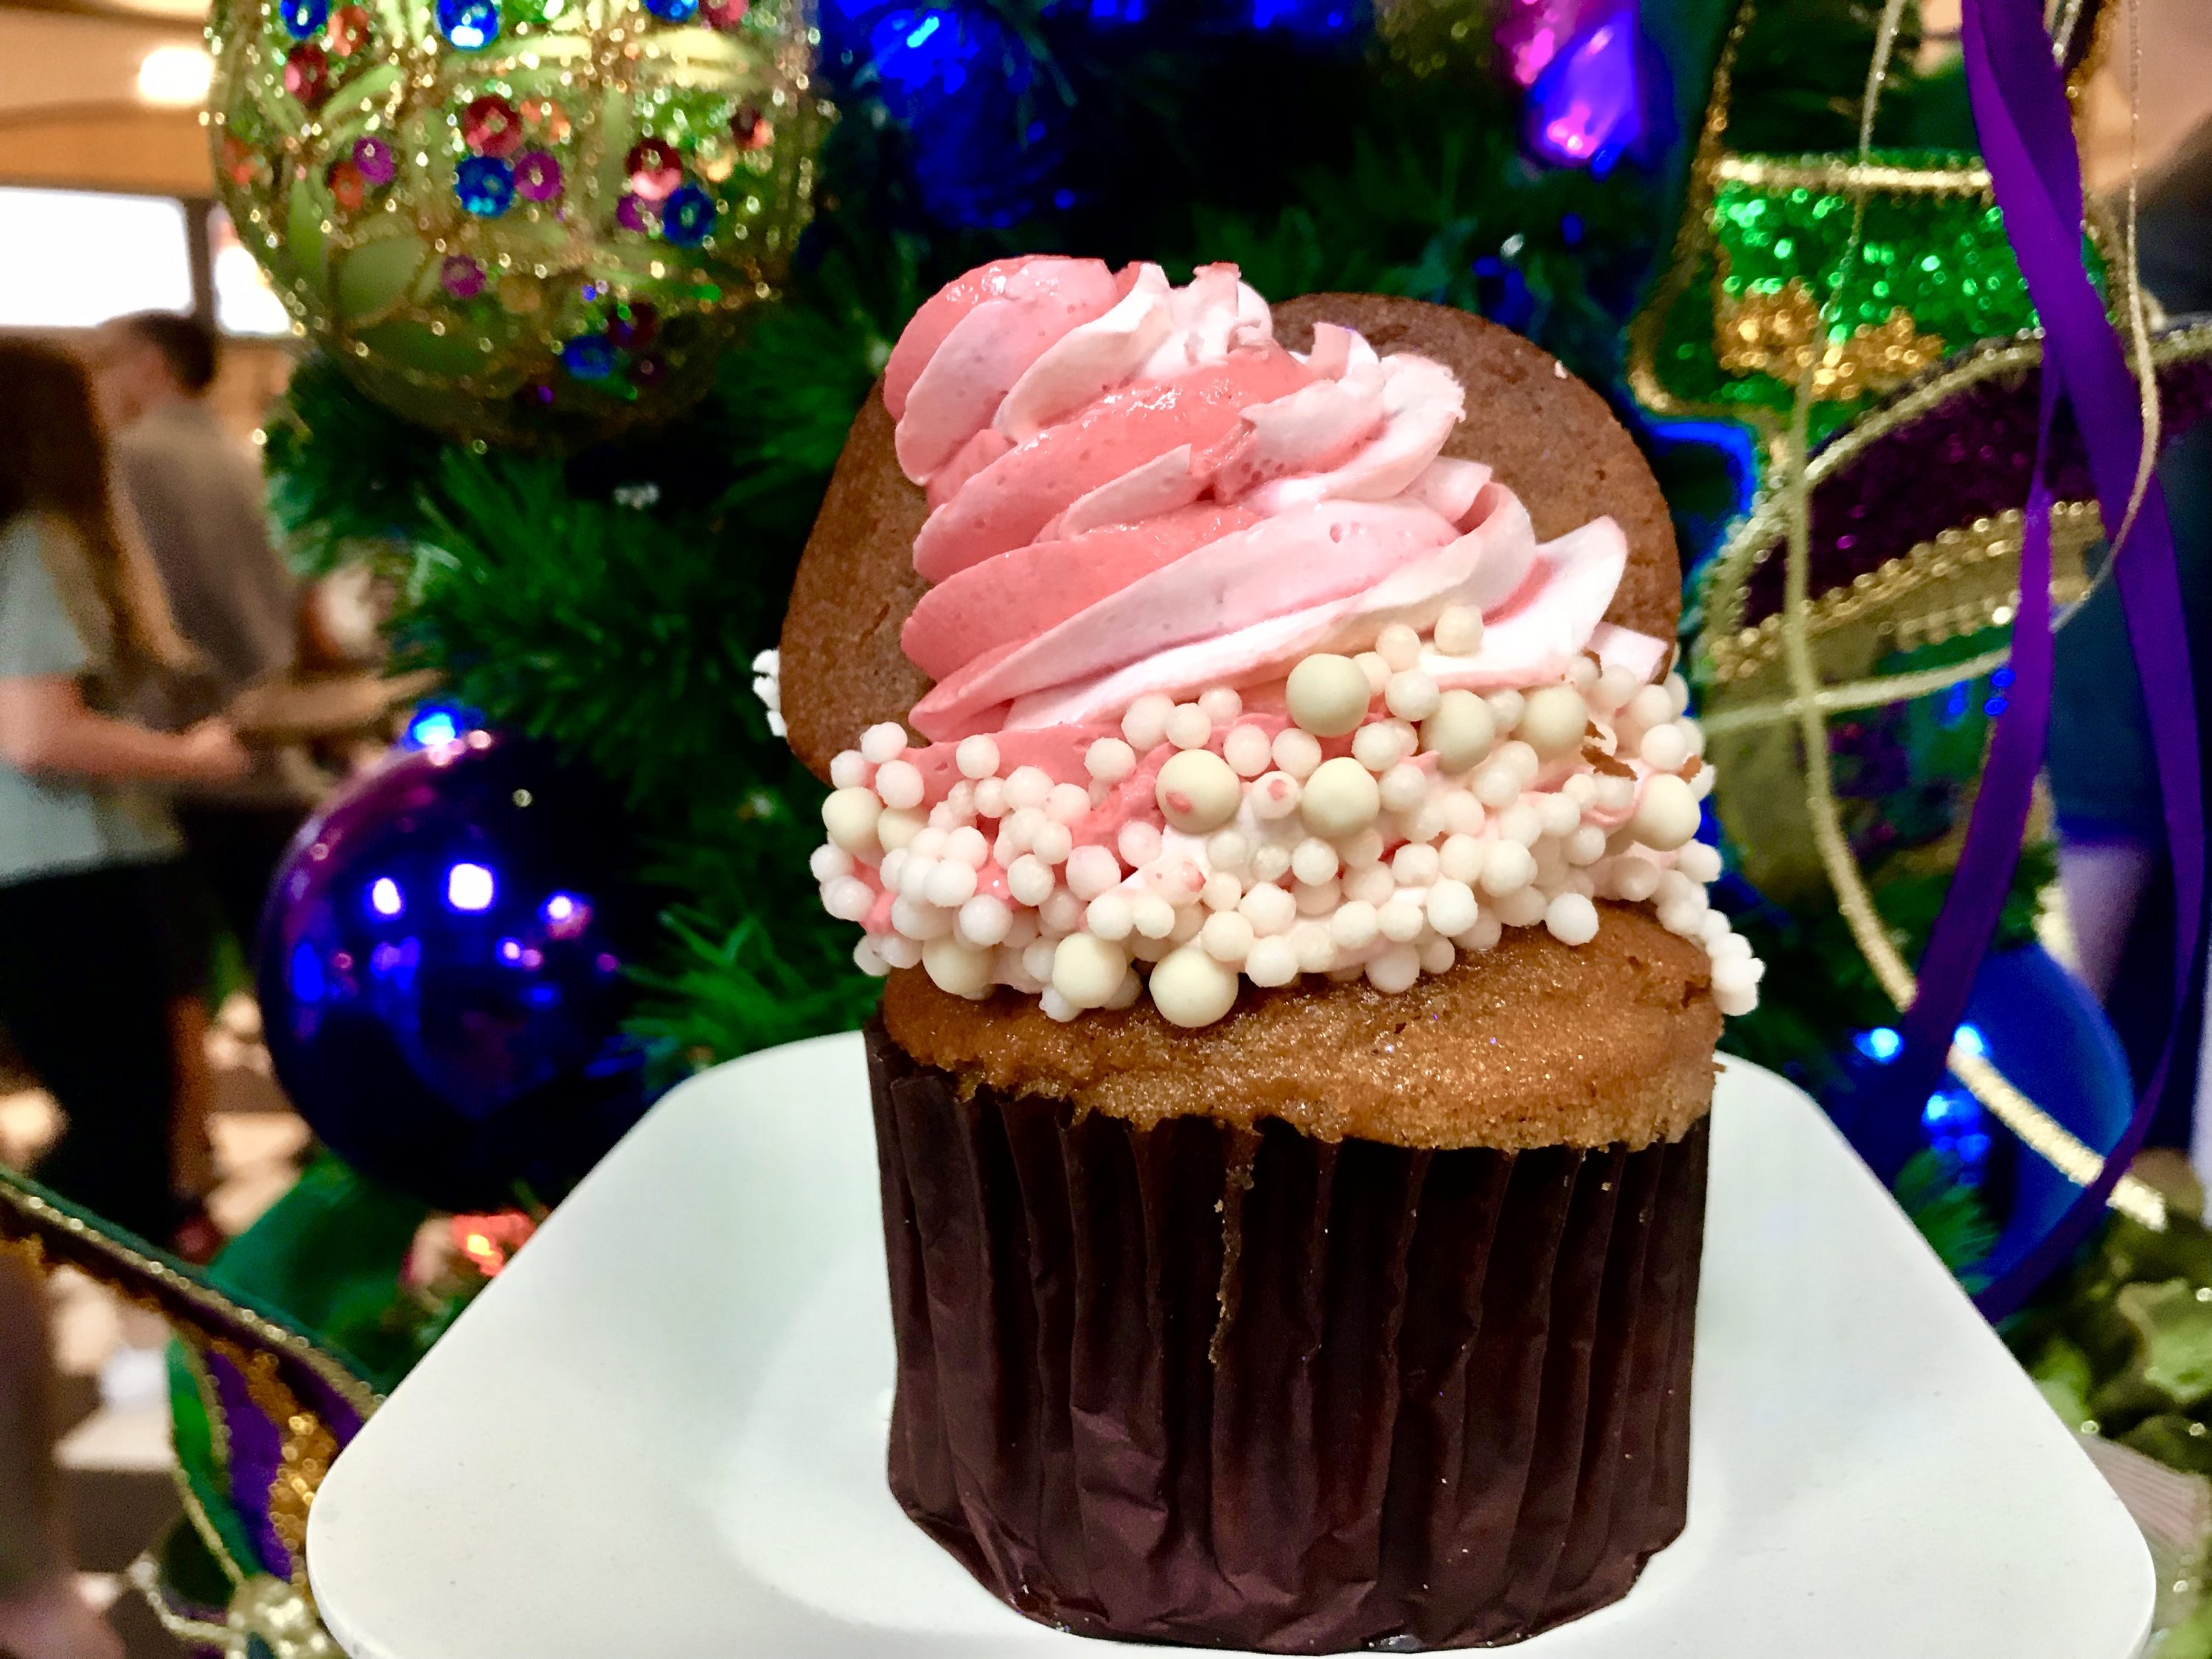 Enjoy Down-Home Bayou Christmas Delights at Port Orleans Resorts